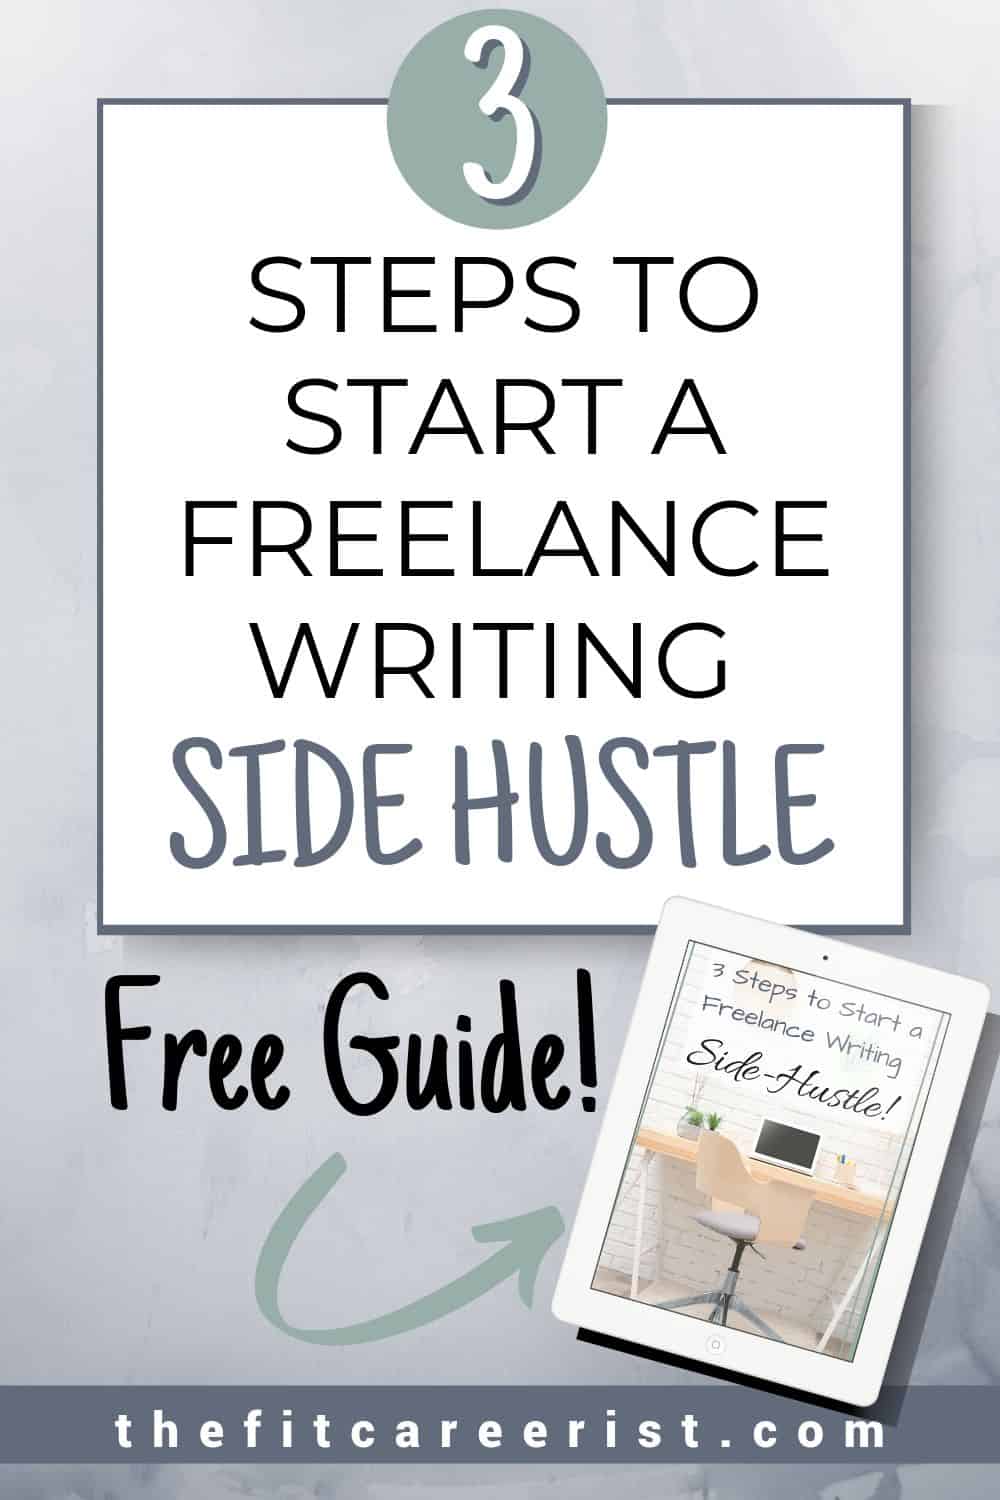 How to start freelance writing for beginners in 3, simple steps. This free guide can help you get started to taking the first steps towards launching your own freelancing business! Whether you're looking to make a little extra money or hope to pivot to freelance as a full-time career, this guide can point you in the right direction if you have no clue where to start! #freelancewriting #businessideas #freeguide